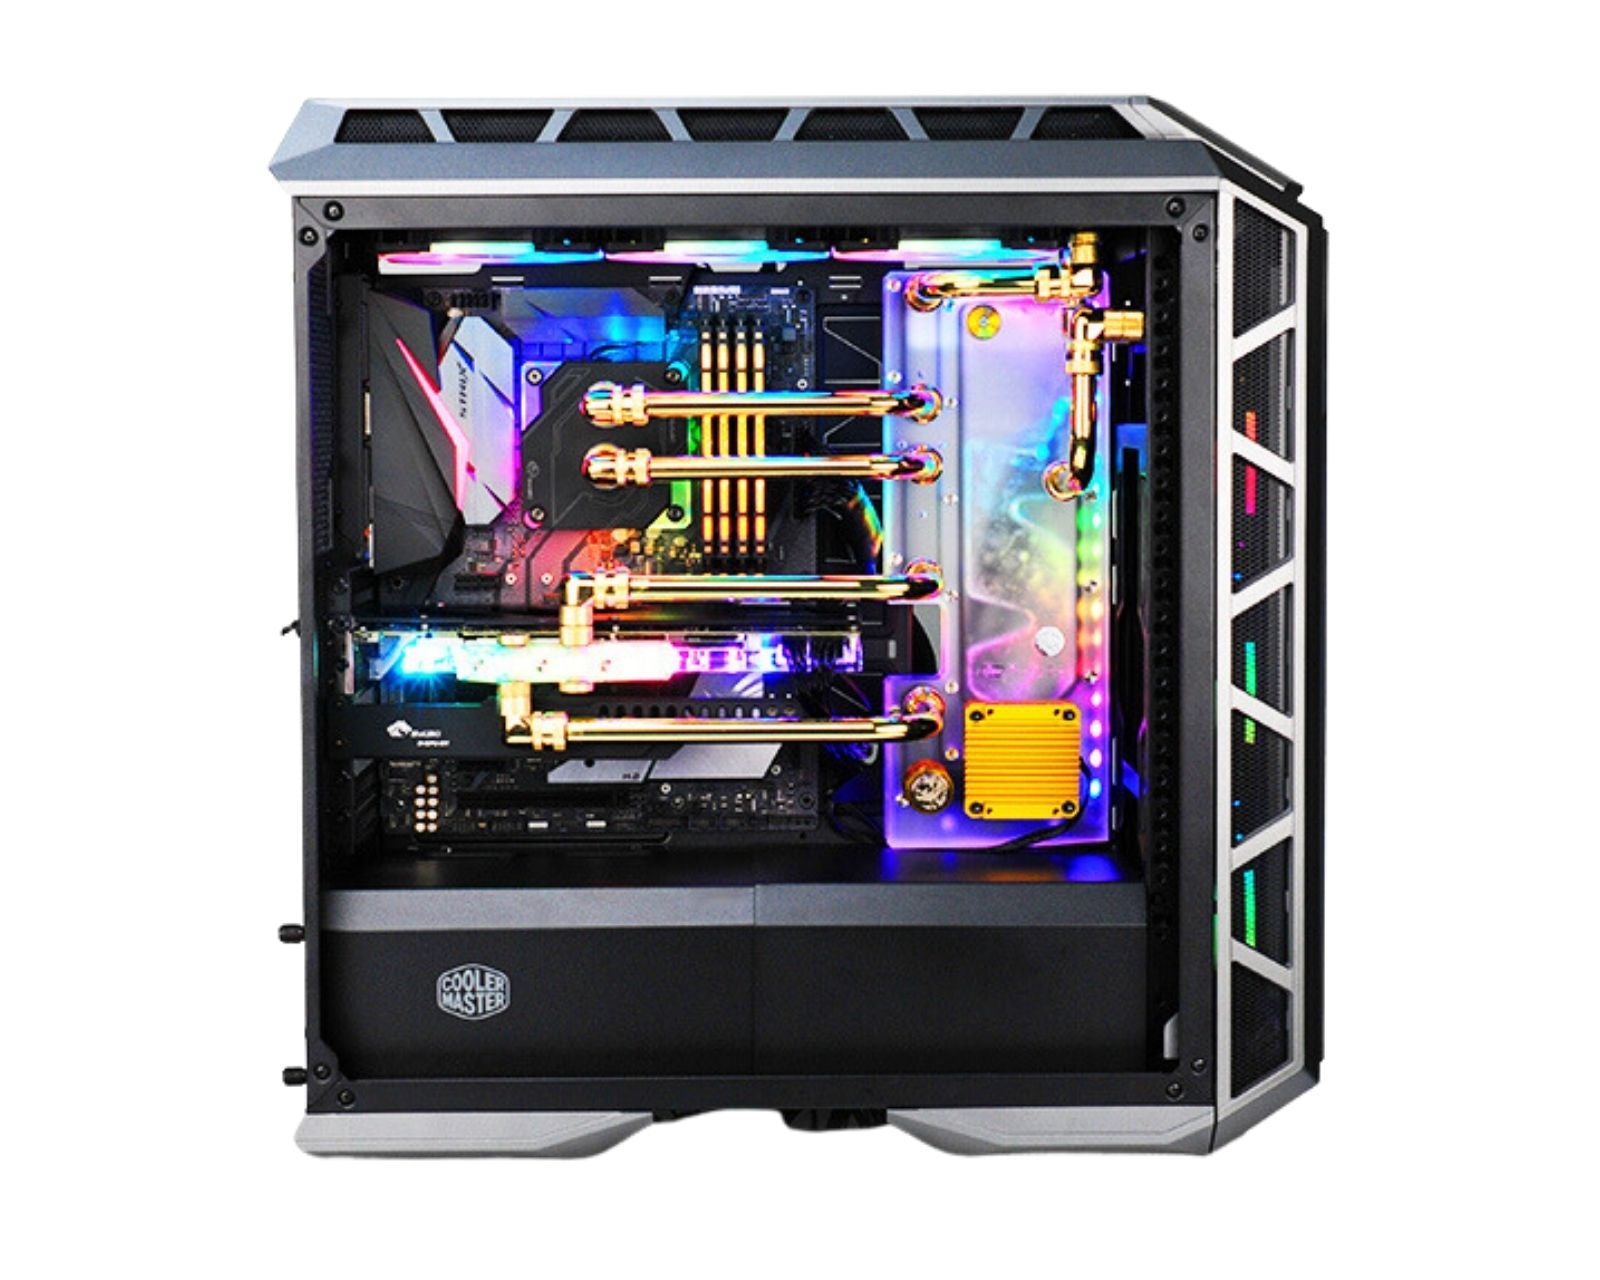 A large marketing image providing additional information about the product Bykski Cooler Master H500P RBW Water Distribution Board - Additional alt info not provided